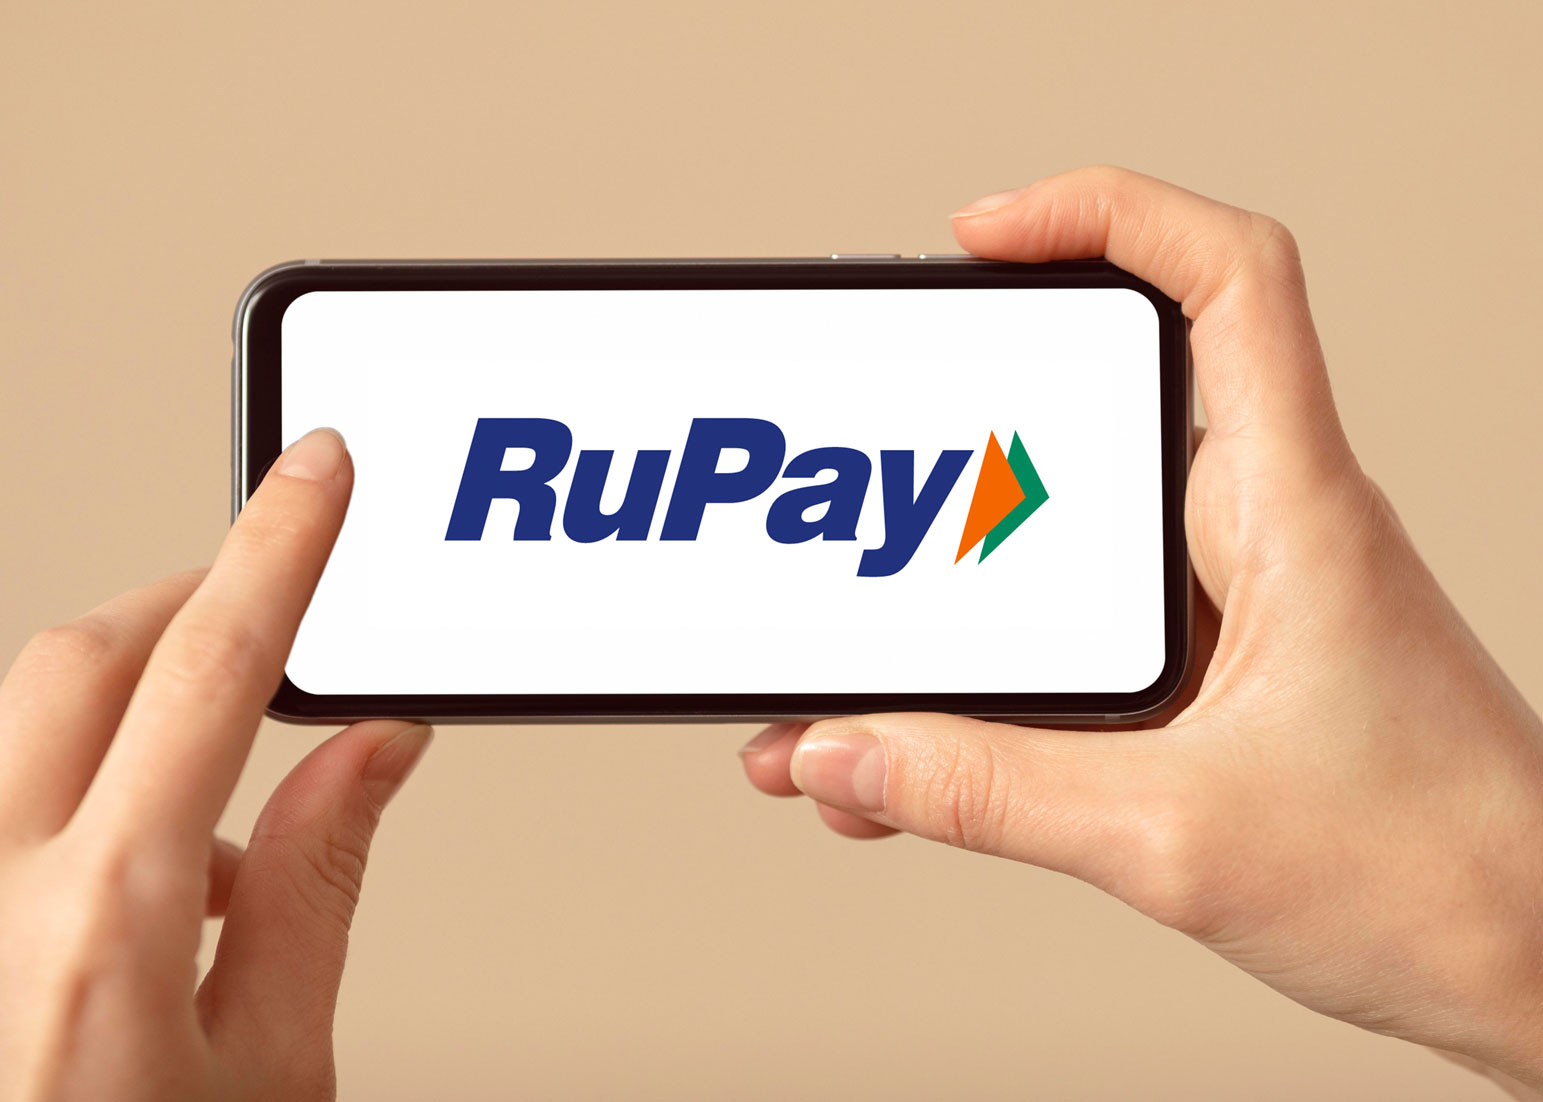 can-rupay-pip-visa-mastercard-in-credit-cards-incentives-to-banks-global-acceptance-hold-the-key